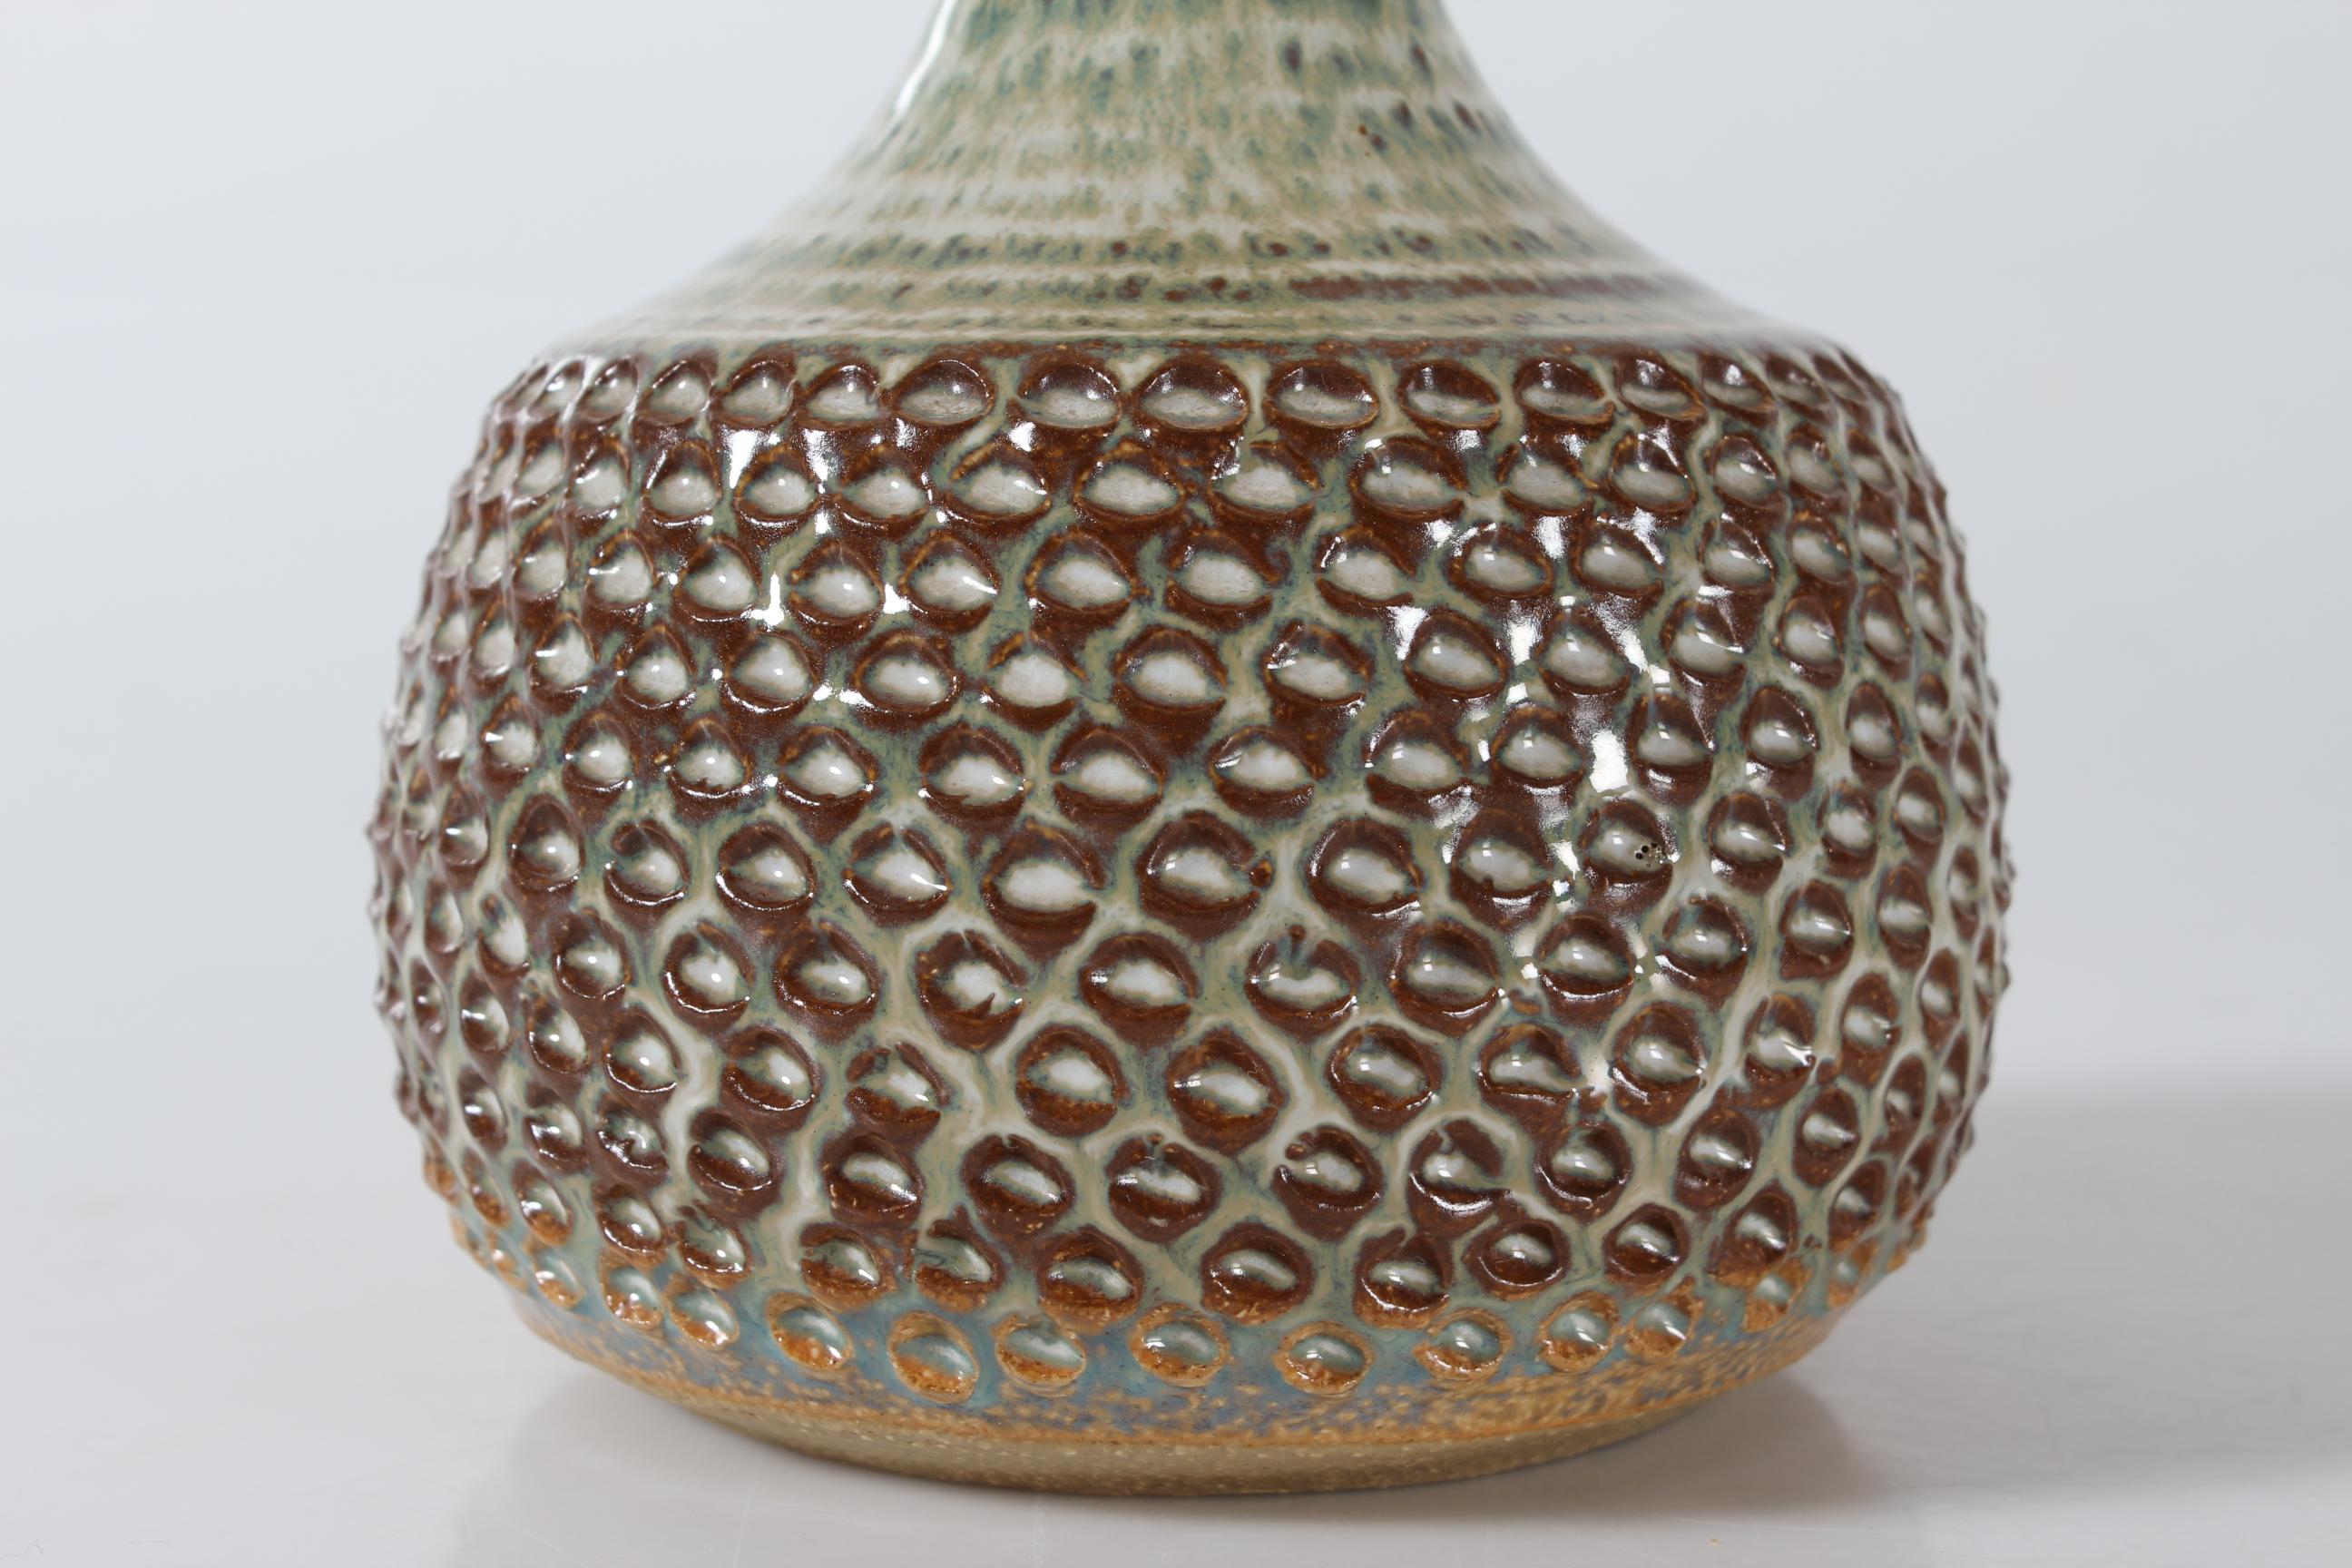 Small stoneware table lamp by  Søholm Stentøj, Denmark, circa 1960s.
The lamp has yellowish green, brown and white glaze with speckles over an fish scale pattern.

Included is a new clip on lamp shade designed and made in Denmark. It is made of